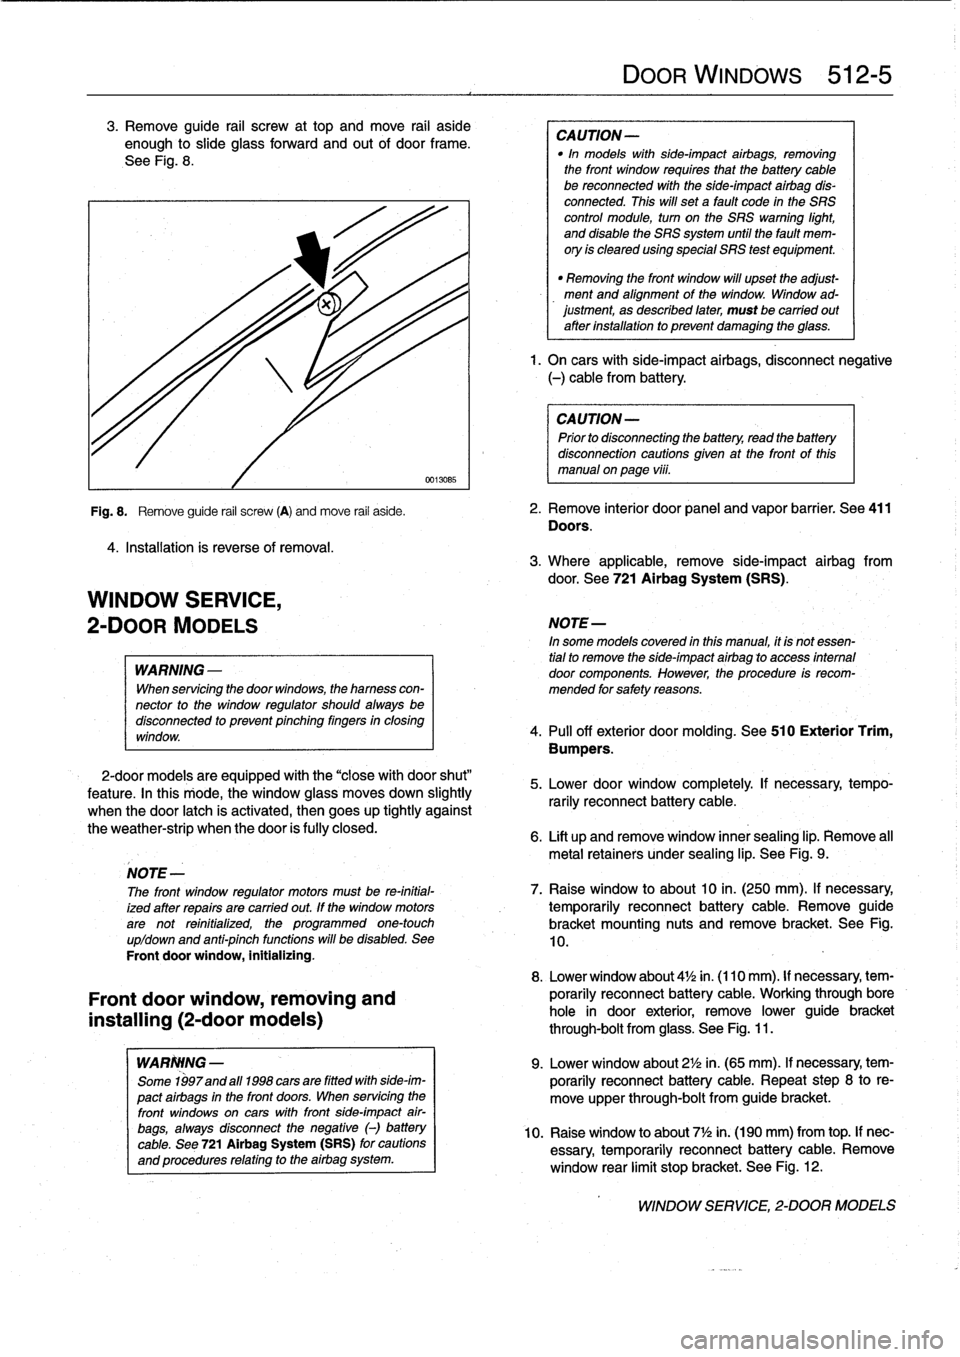 BMW 318i 1997 E36 User Guide 
3
.
Remove
guide
rail
screw
at
top
and
move
rail
aside
enough
to
slide
glass
forward
and
out
of
door
frame
.

See
Fig
.
8
.

4
.
Installation
is
reverse
of
removal
.

WINDOW
SERVICE,

2-DOOR
MODELS

